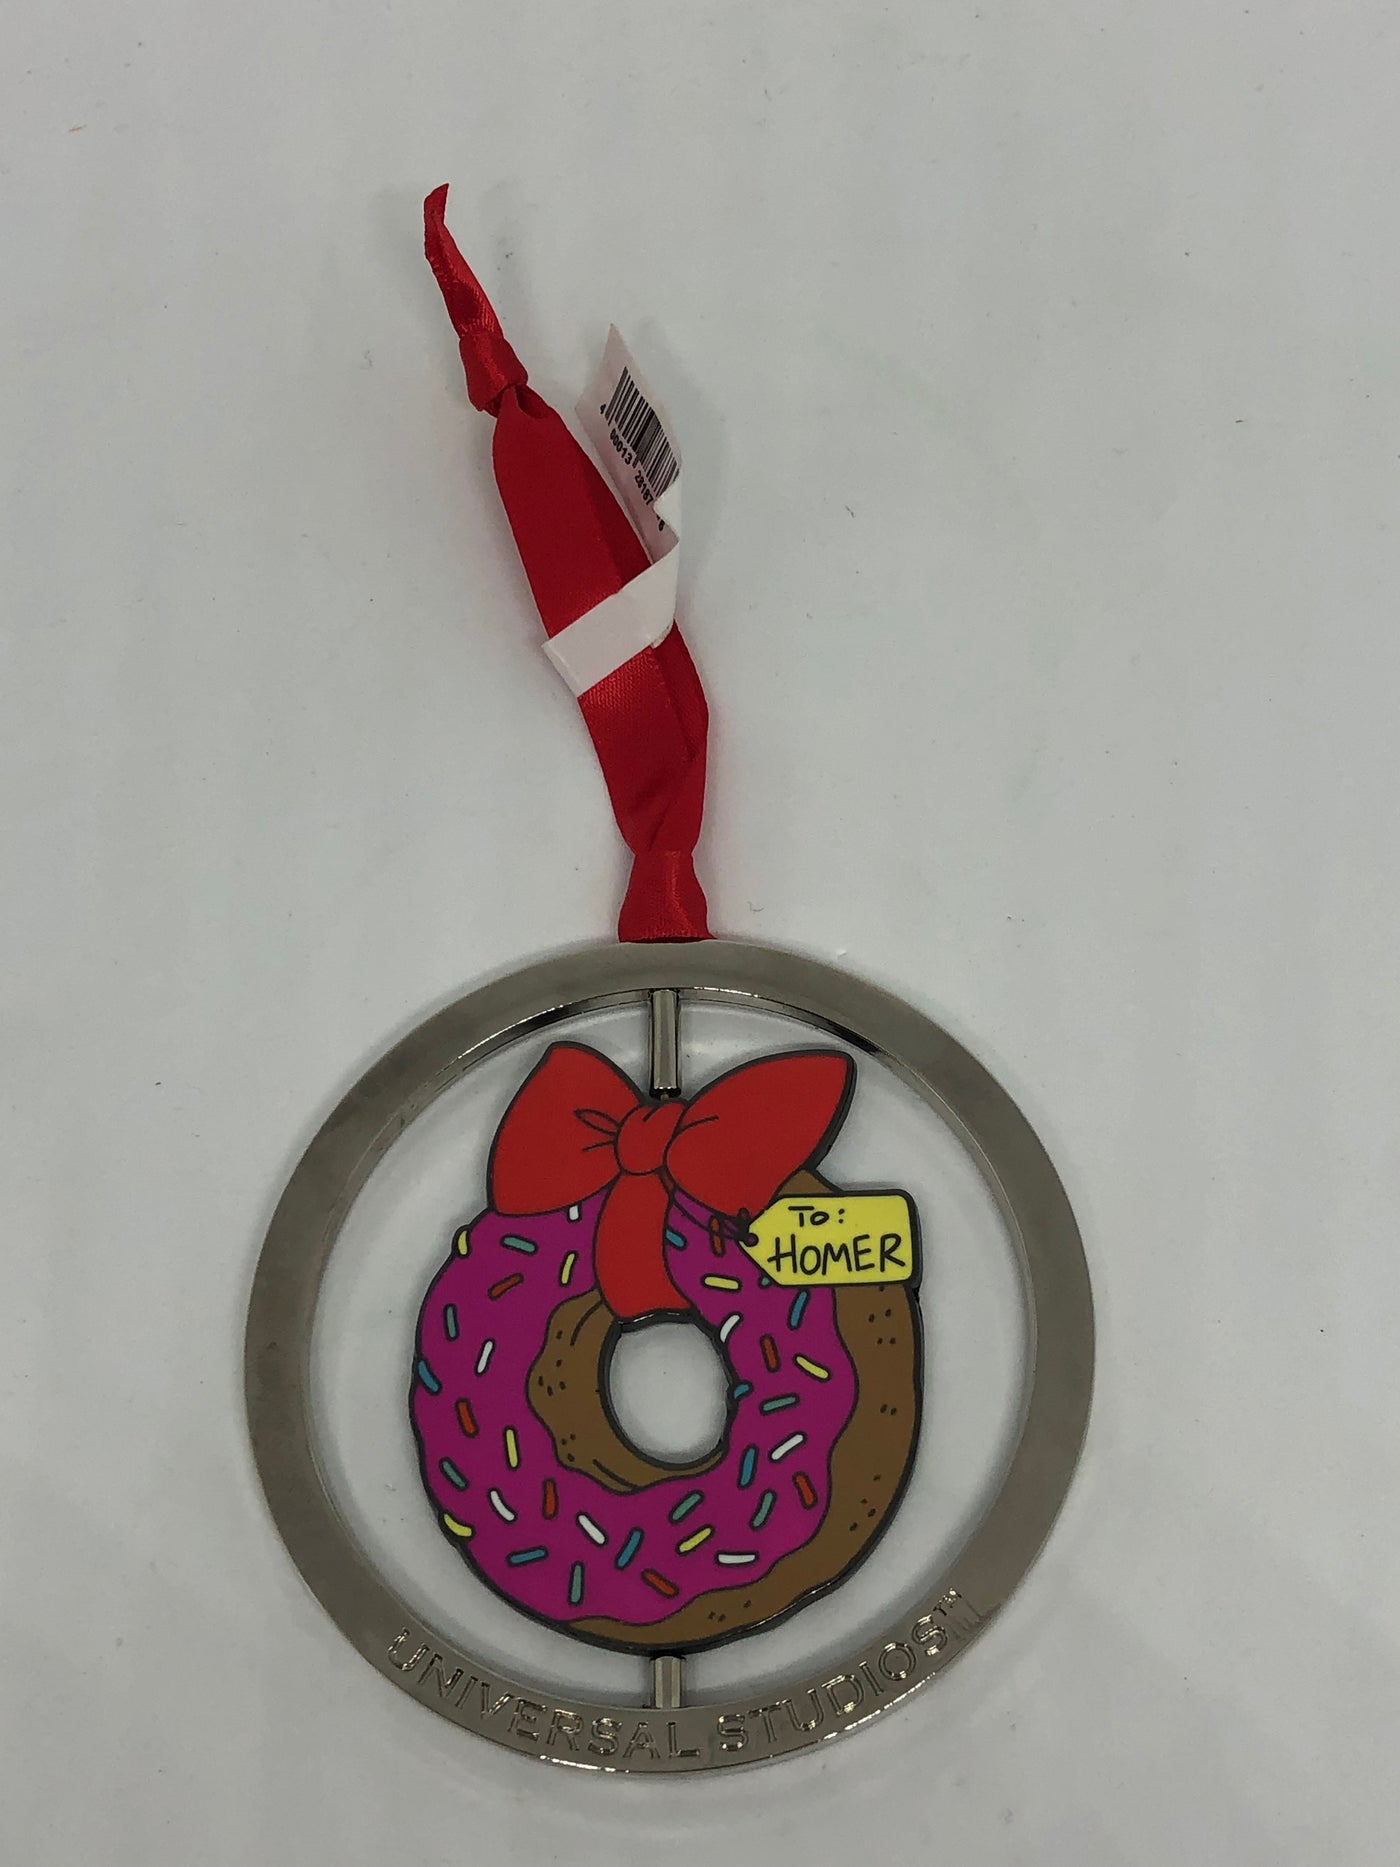 Universal Studios The Simpsons Donut to Home Spinner Metal Ornament New with Tag